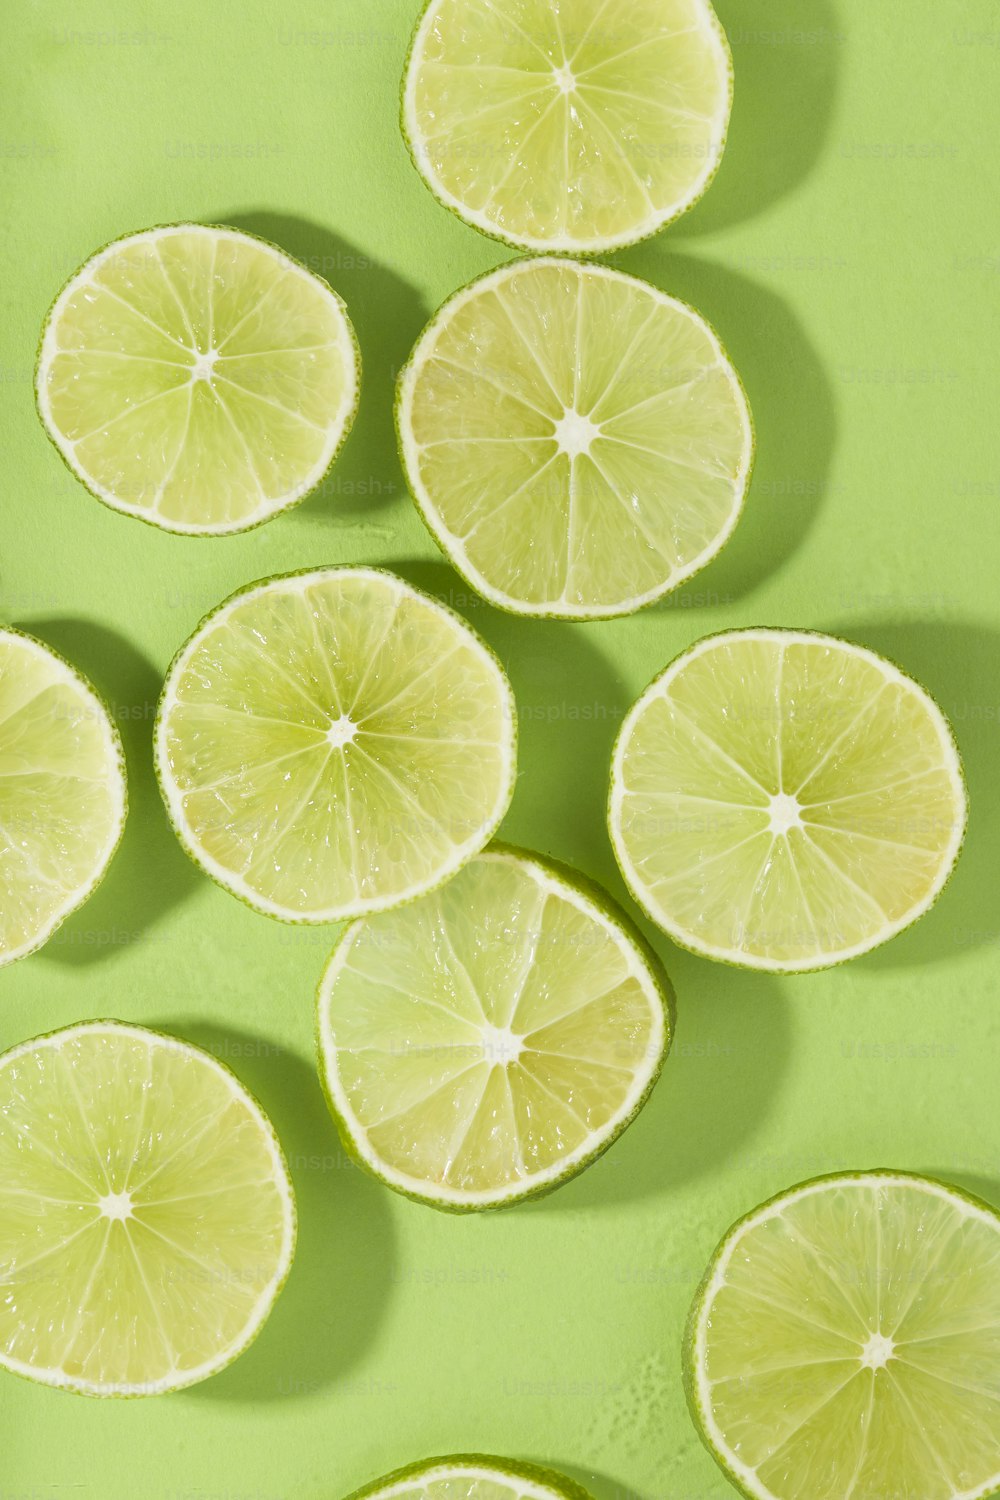 a group of lemons cut in half on a green surface